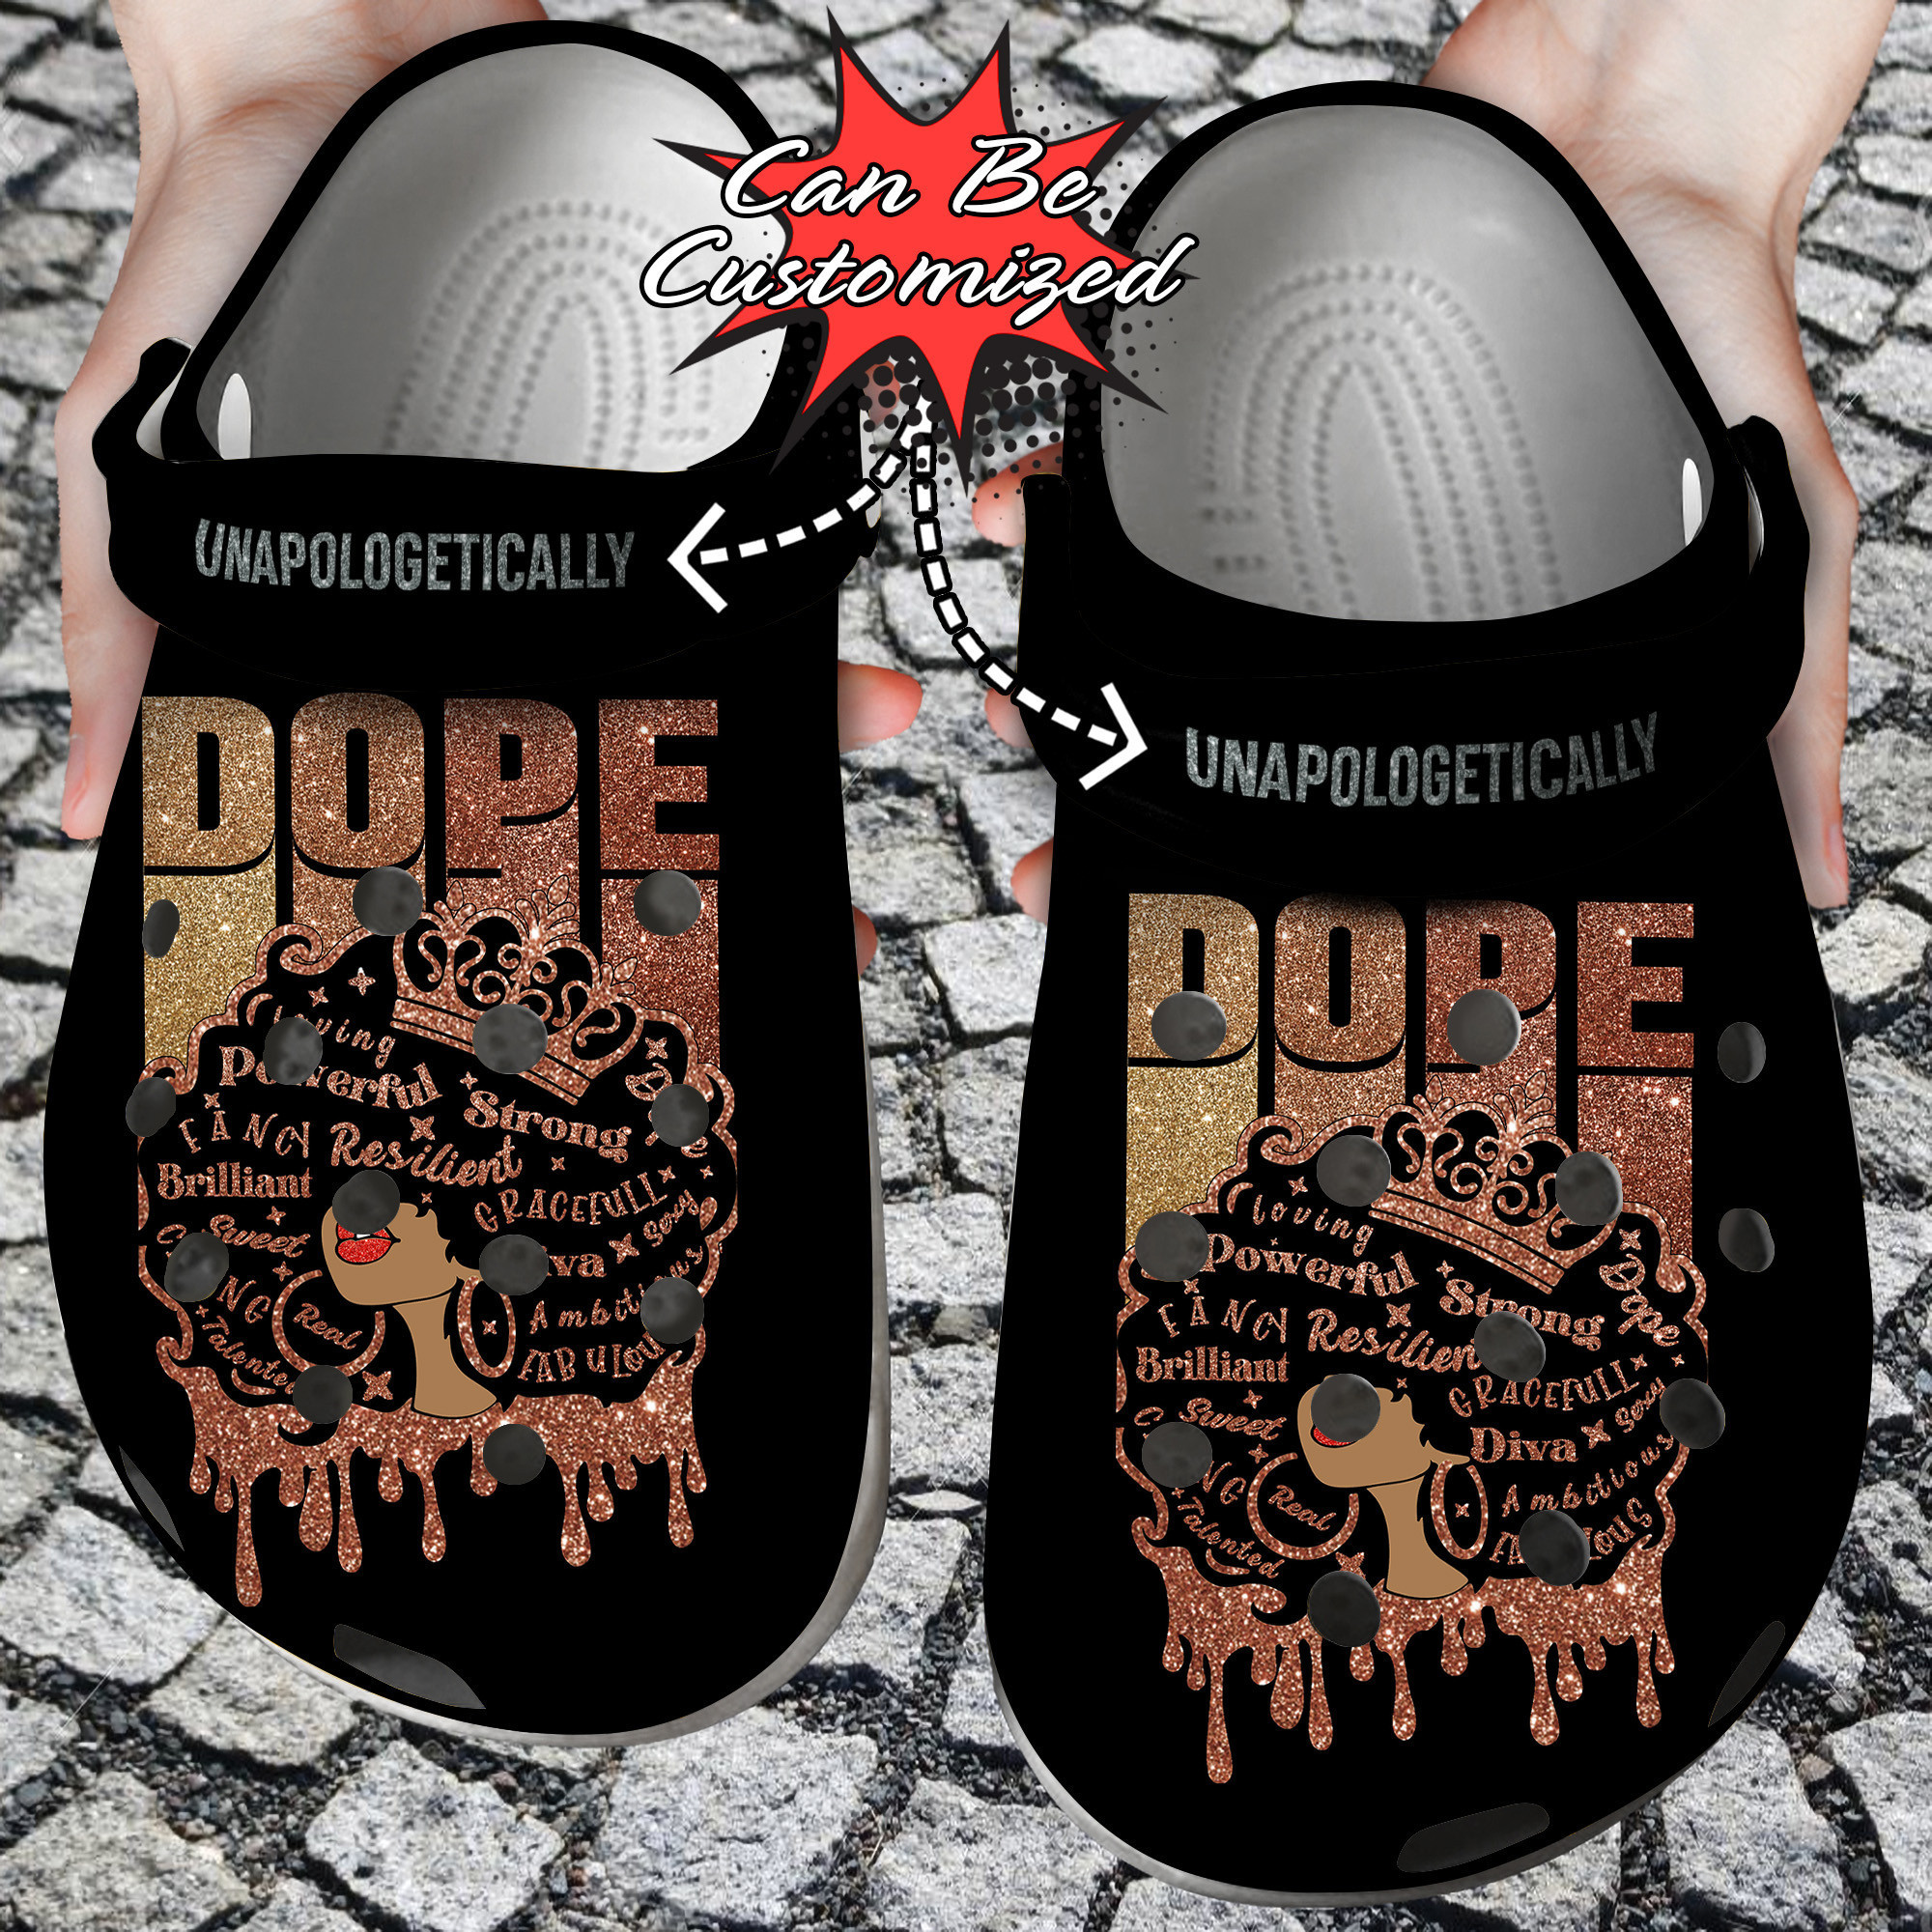 Custom Crocs Personalized Unapologetically Dope Black Woman Clog Shoes